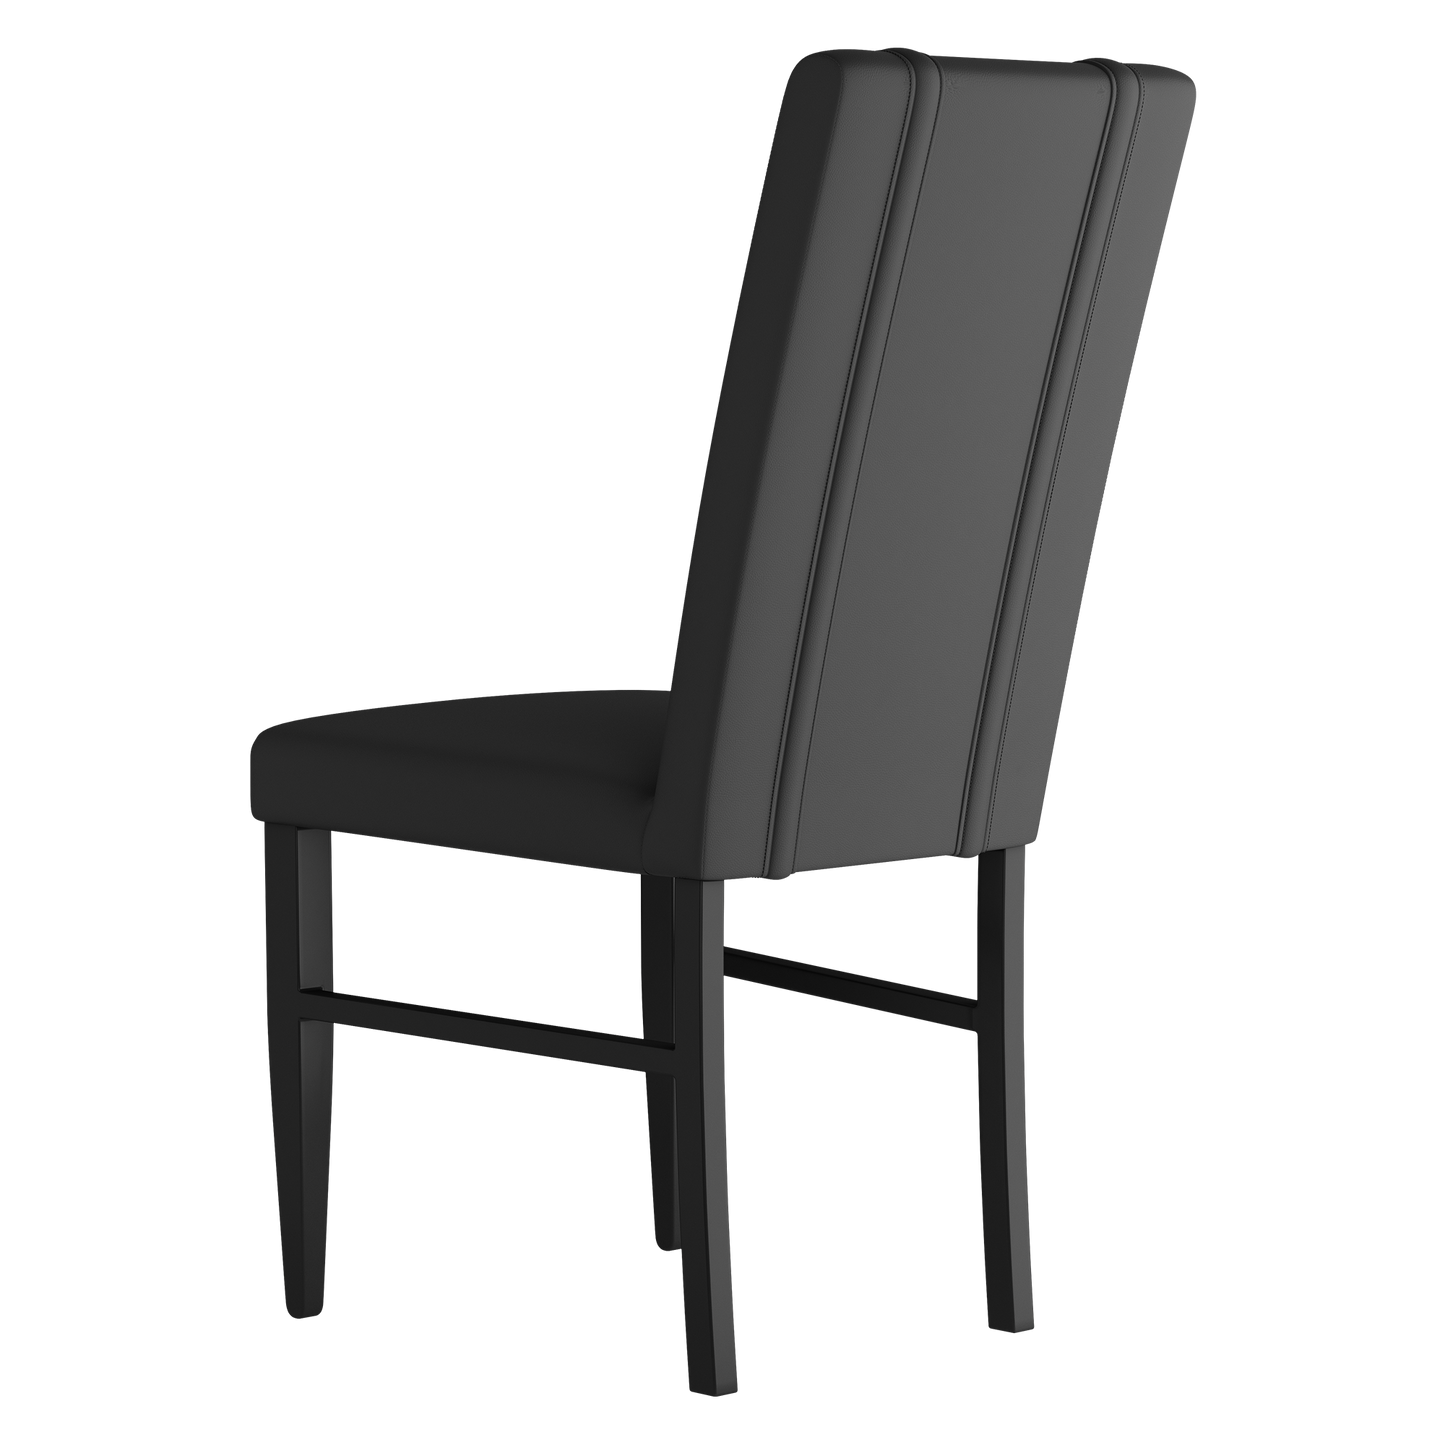 Side Chair 2000 with Orlando City FC Wordmark Logo Set of 2